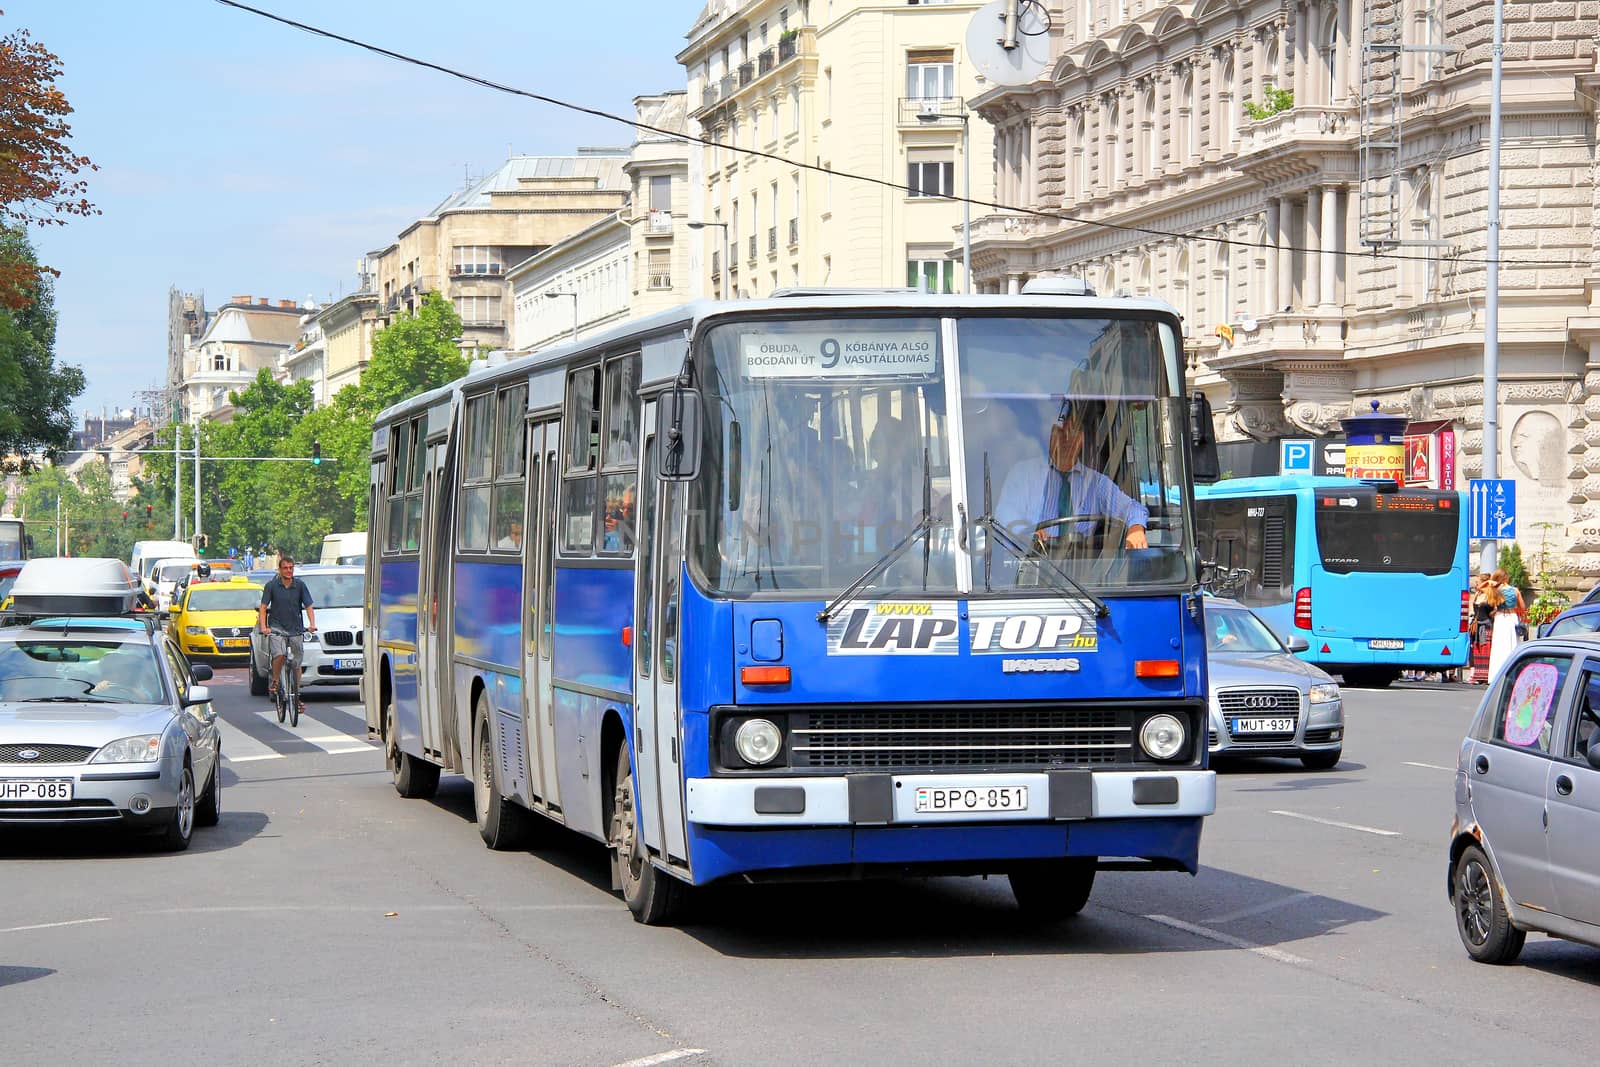 BUDAPEST, HUNGARY - JULY 23, 2014: Blue articulated city bus Ikarus 280.49 at the city street.